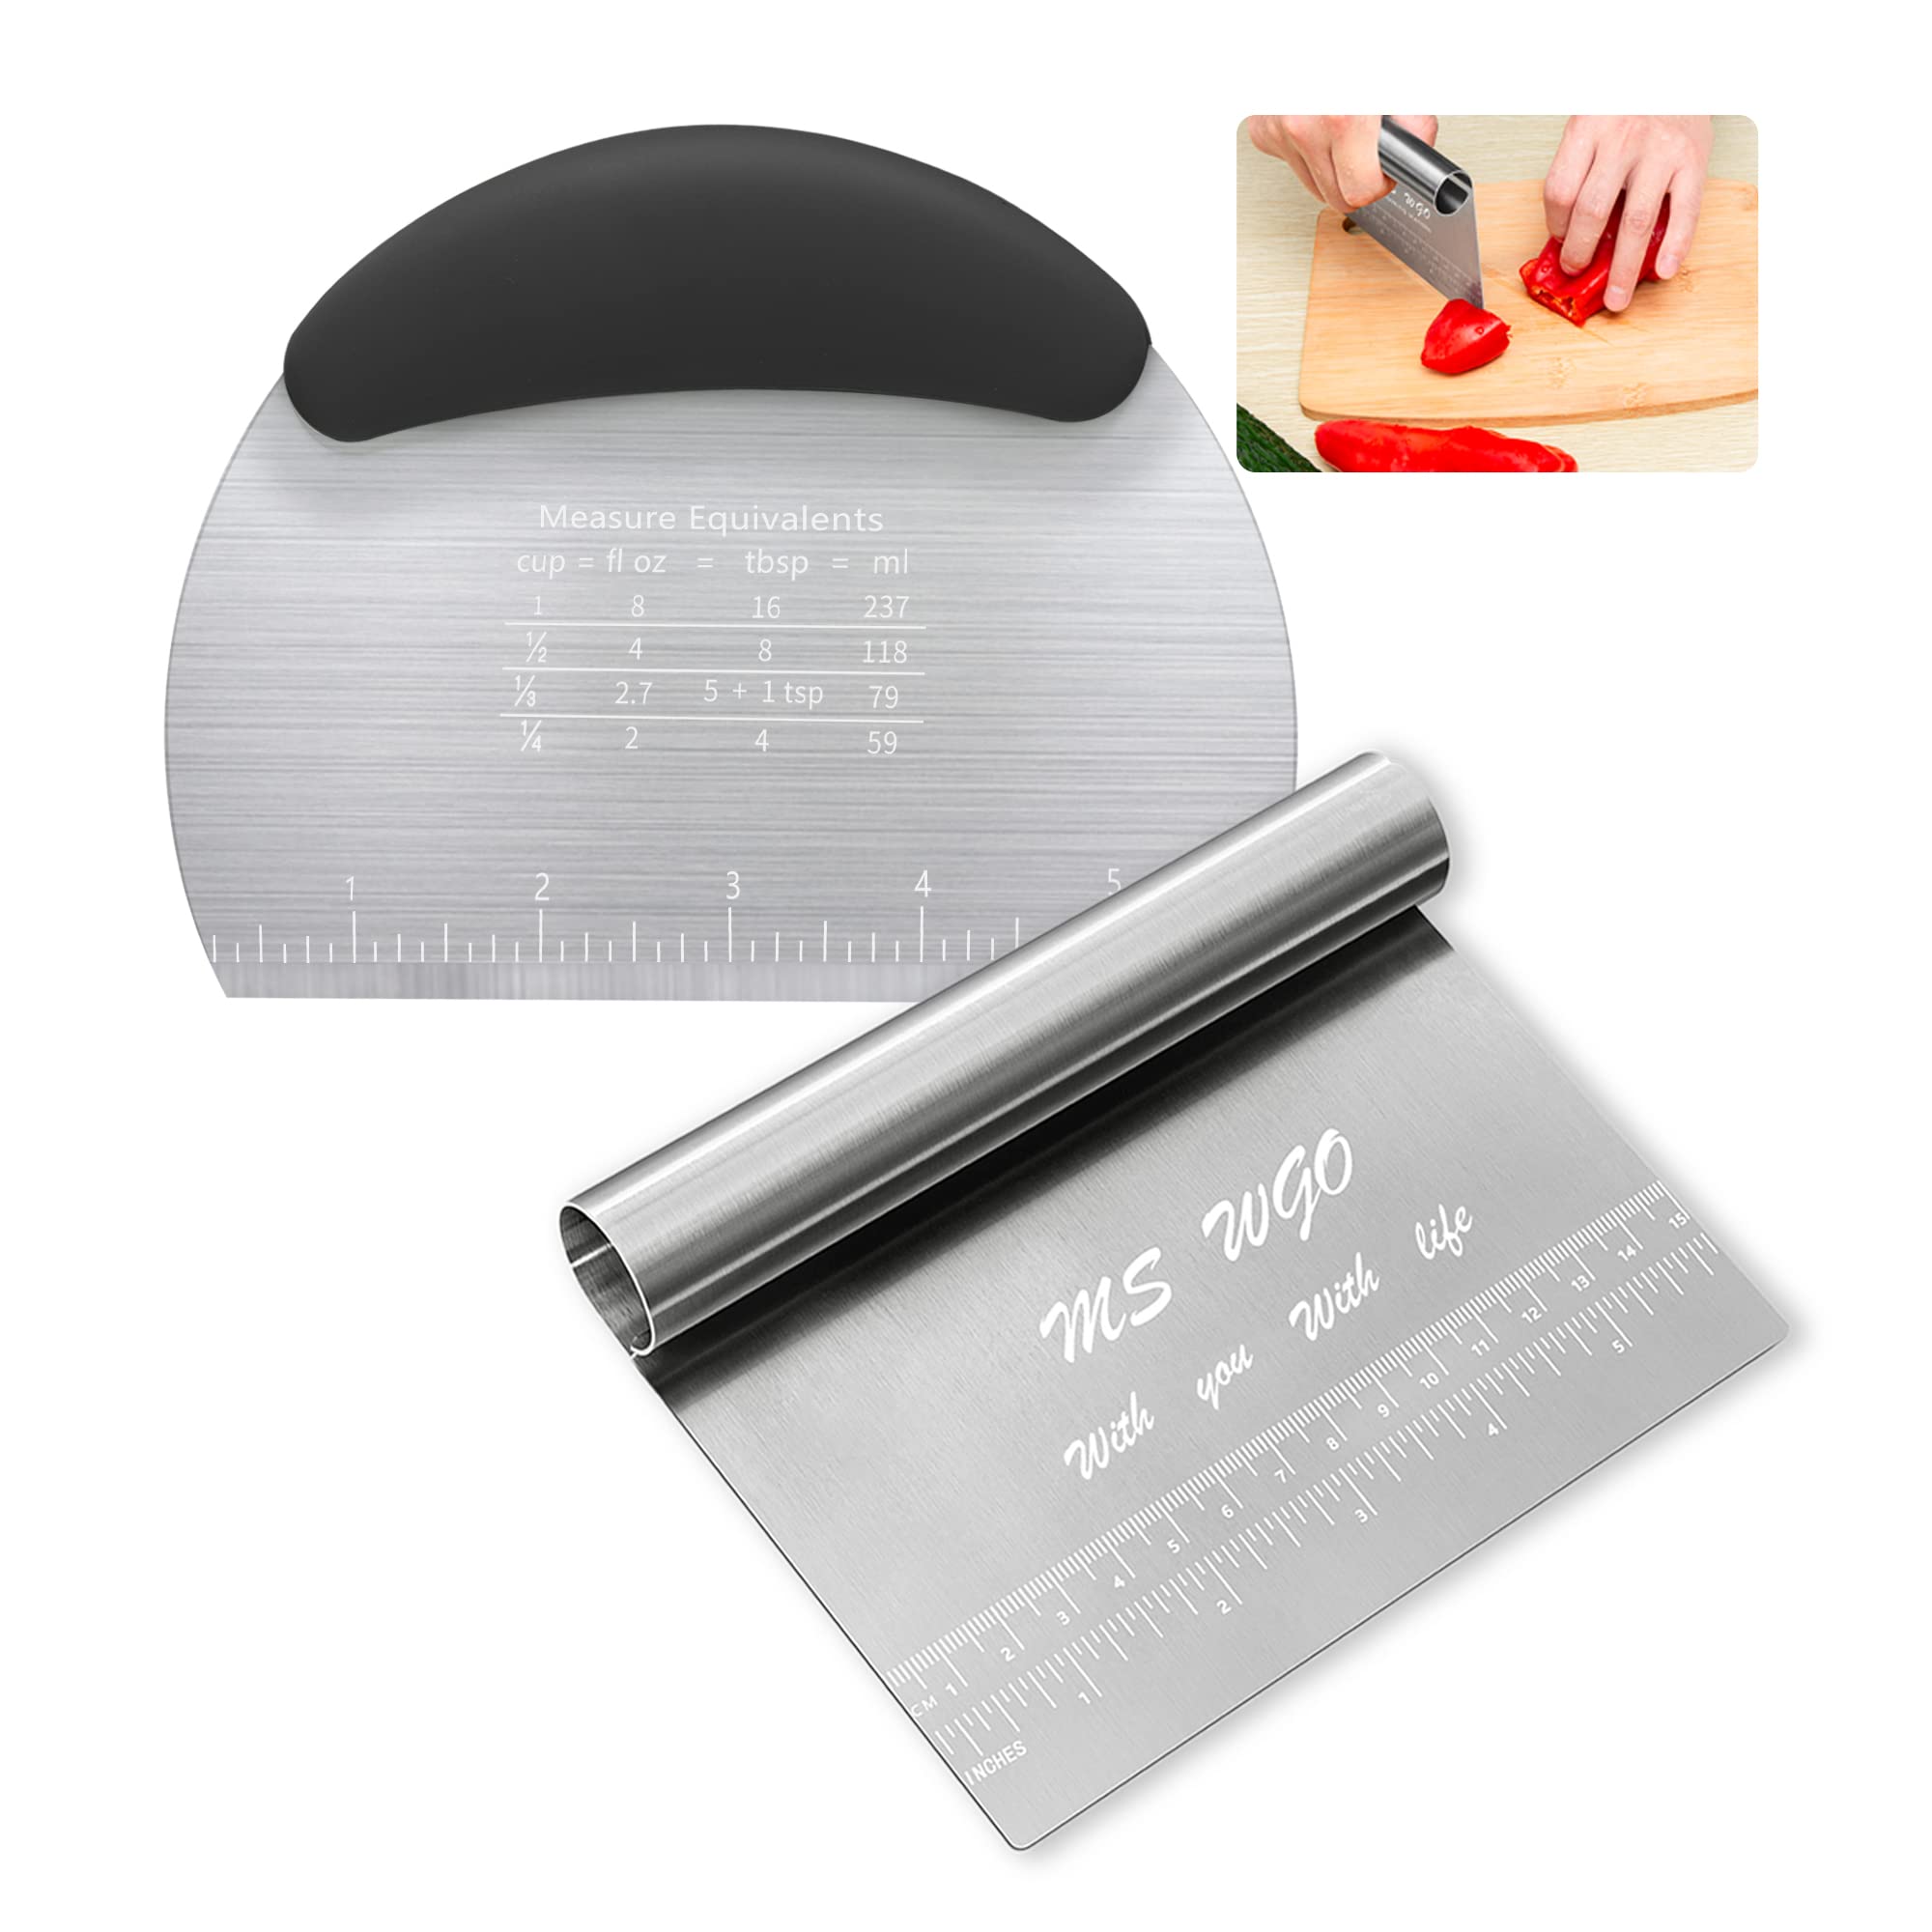 LavoHome Stainless Steel Bench Scraper & Dough Cutter - Multi Function Kitchen Tool Scoop Scraper Best Pizza and Dough Cutter with Ruler Measurements